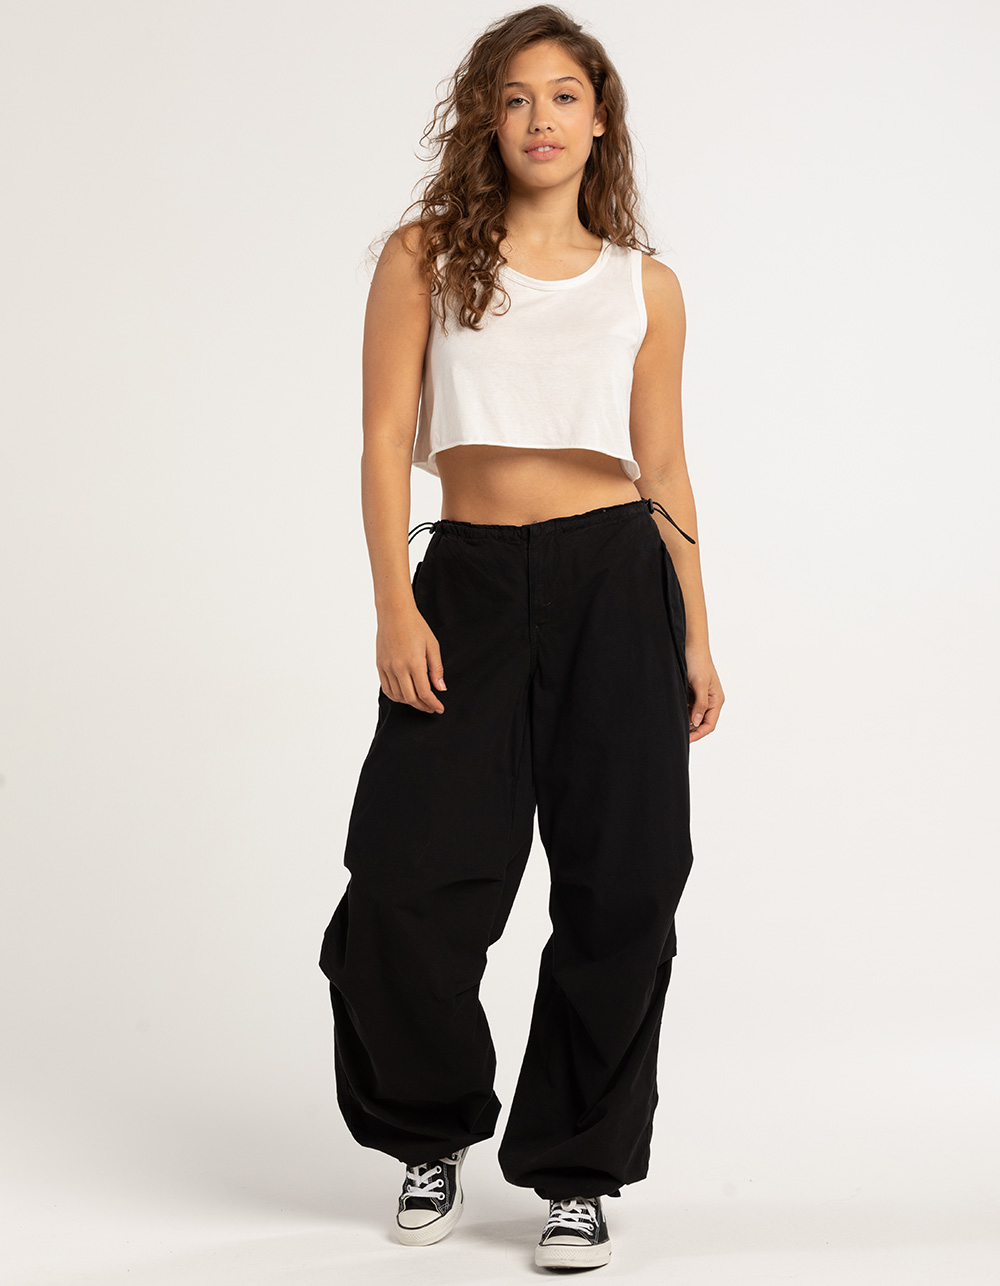 BDG Urban Outfitters Baggy Cargo Womens Pants